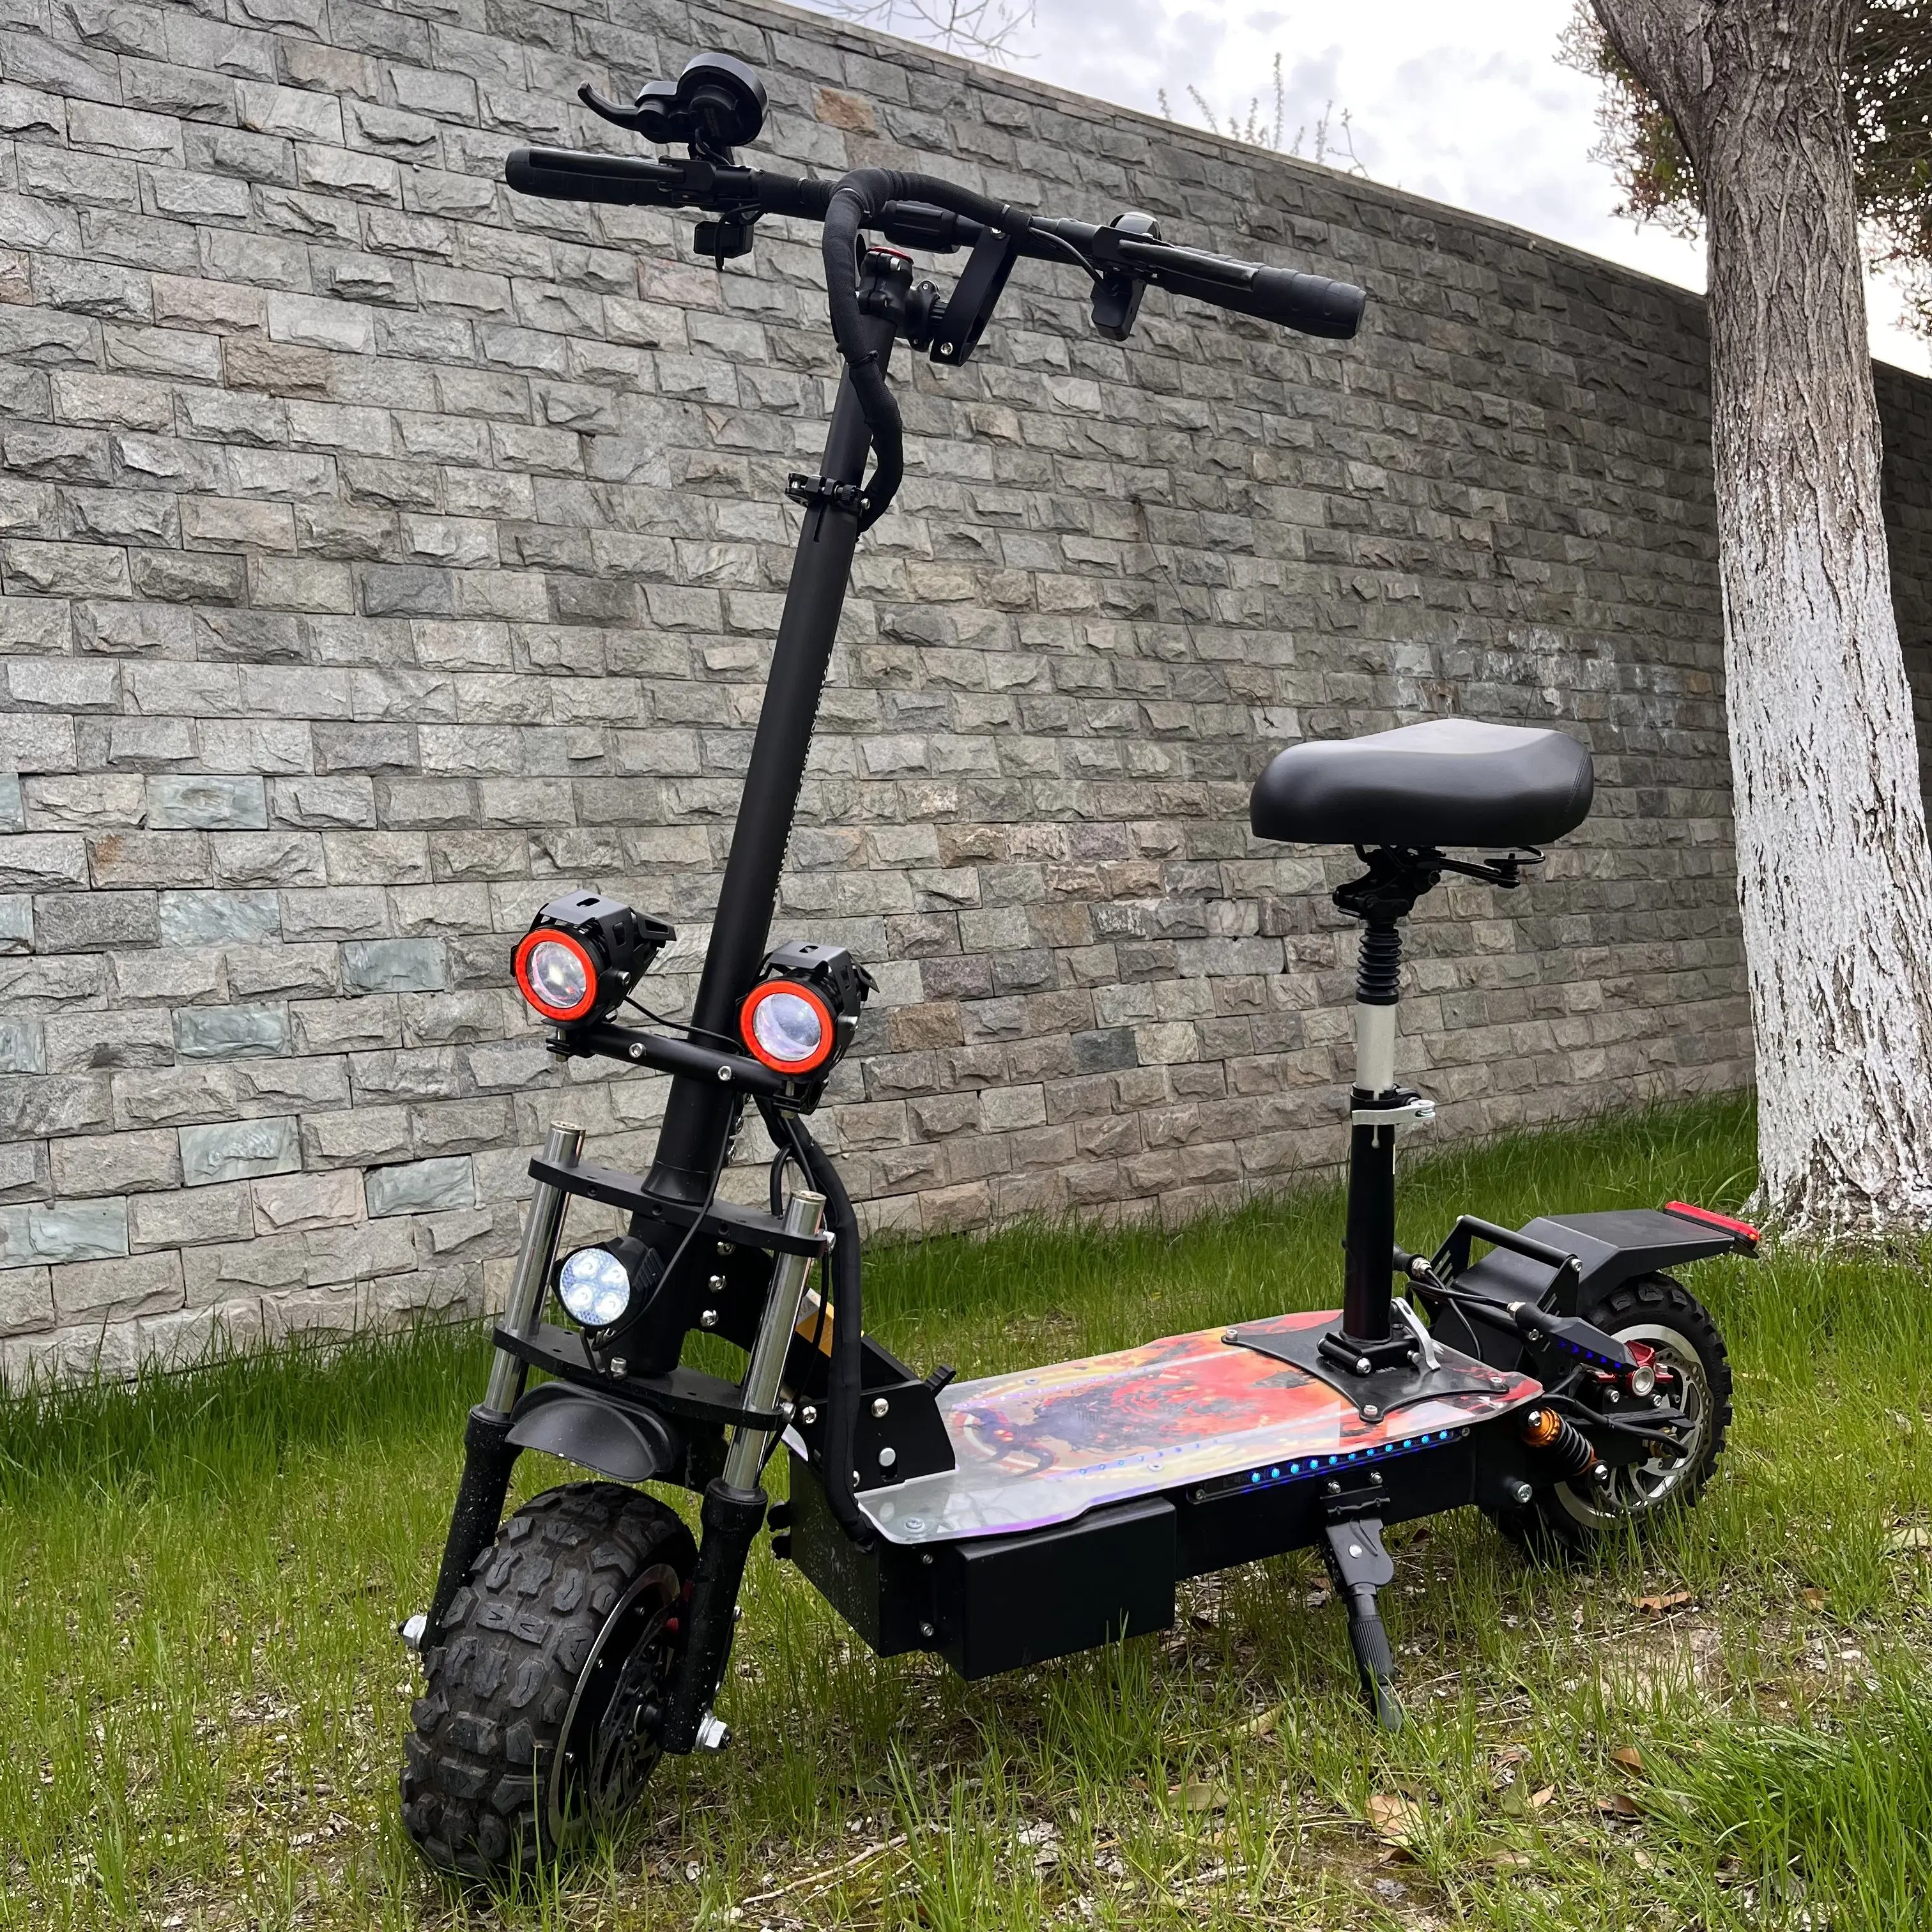 

Hot selling 35ah lithuim battery 60v range 80-100km per charge high power scooter electric 5600w dual motor in eu warehouse for